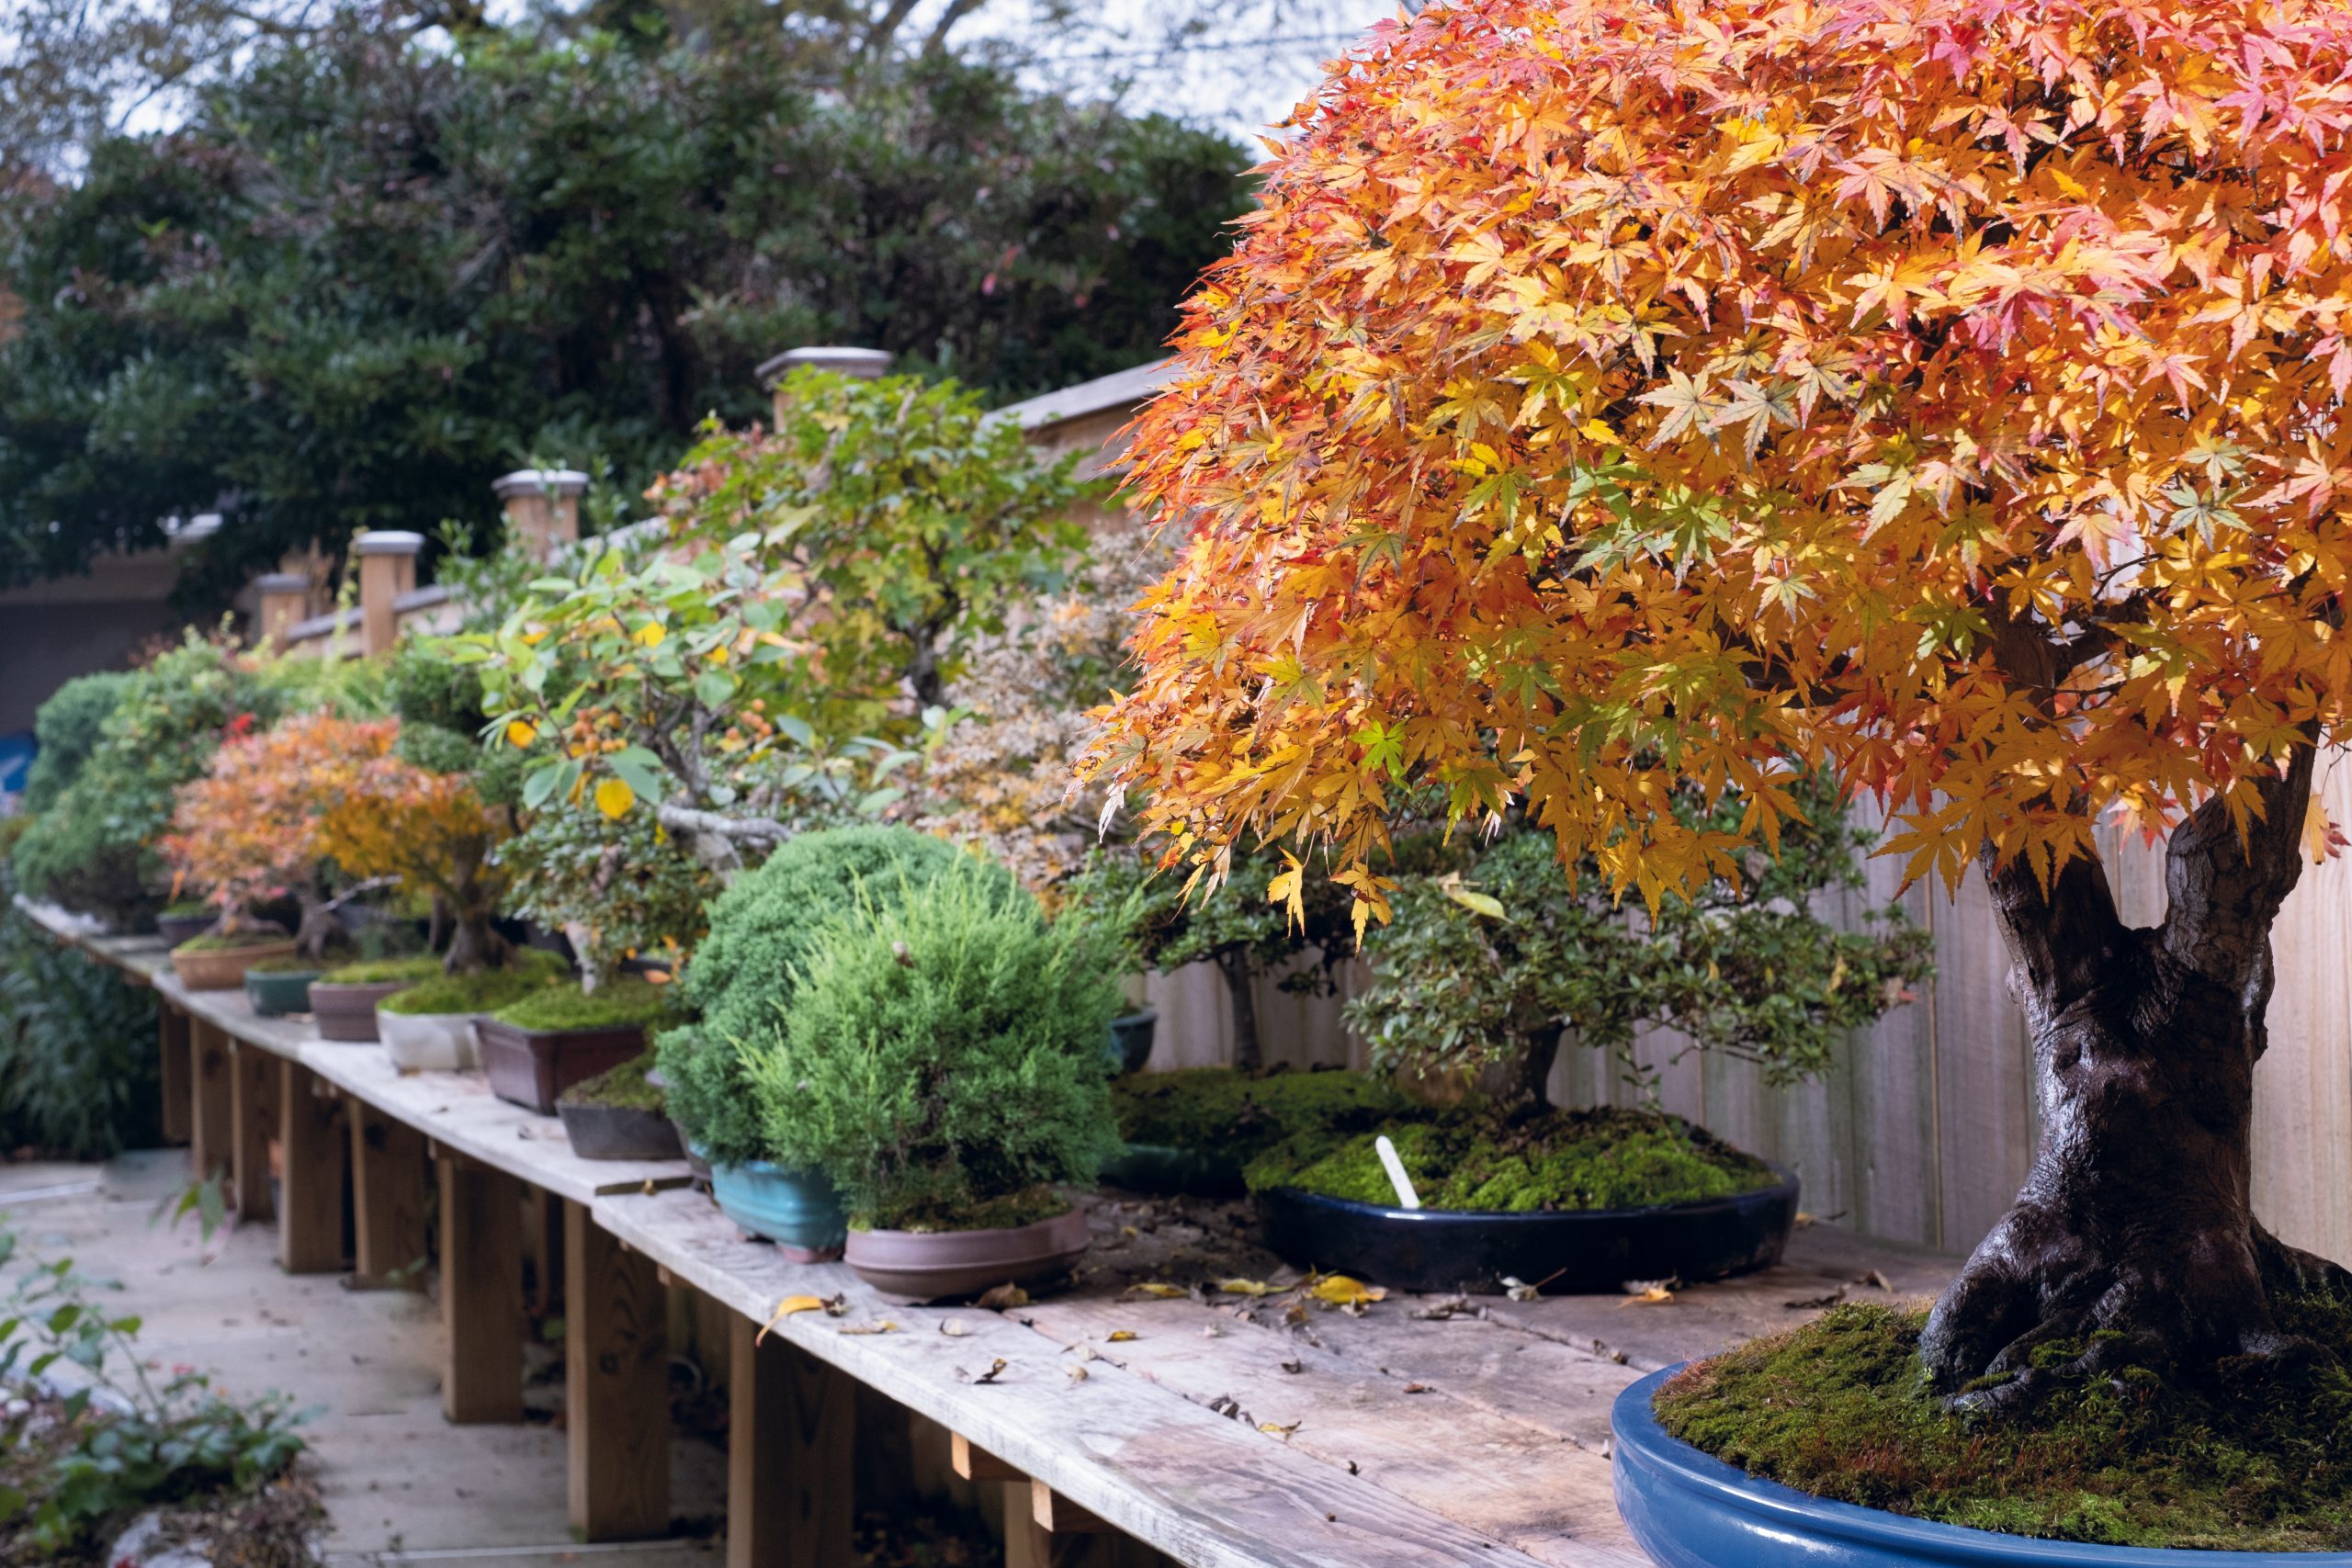 Bonsai trees are displayed on traditional benches in the garden.